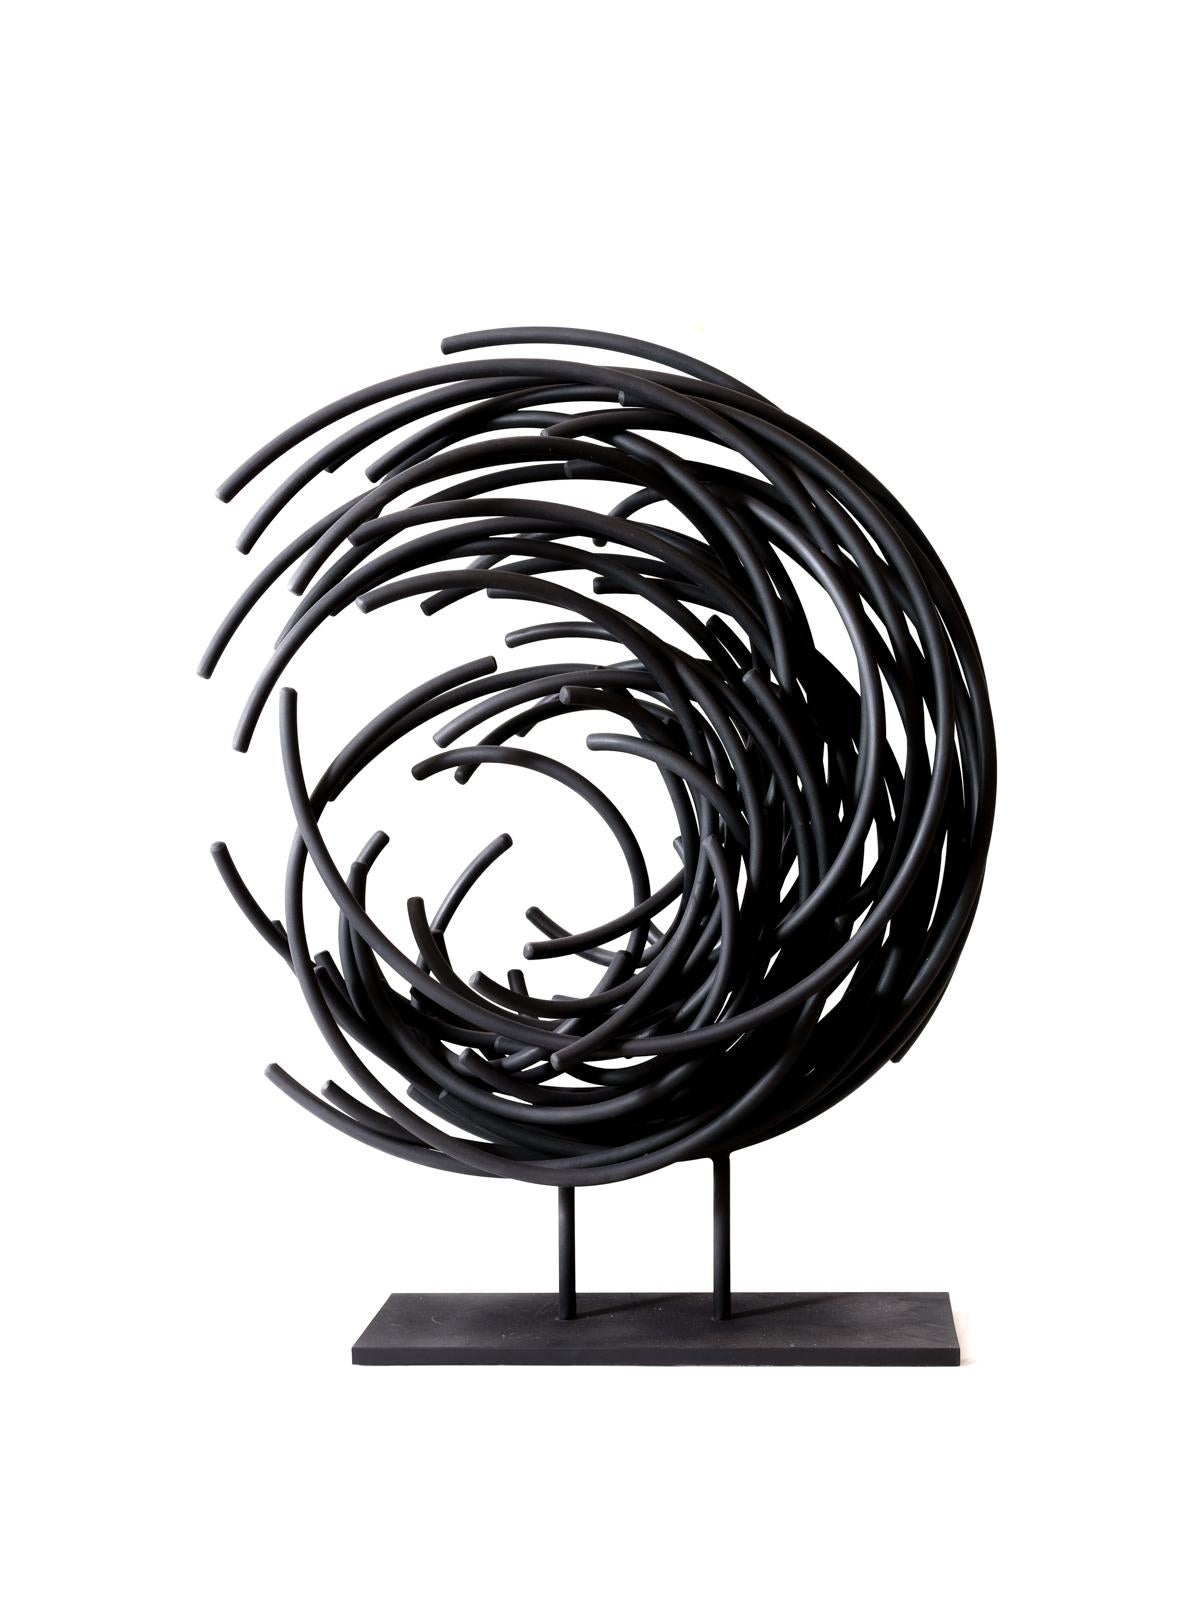 Maelstrom Series No 4 - layered, intersecting, forged aluminum sculpture - Black Abstract Sculpture by Shayne Dark